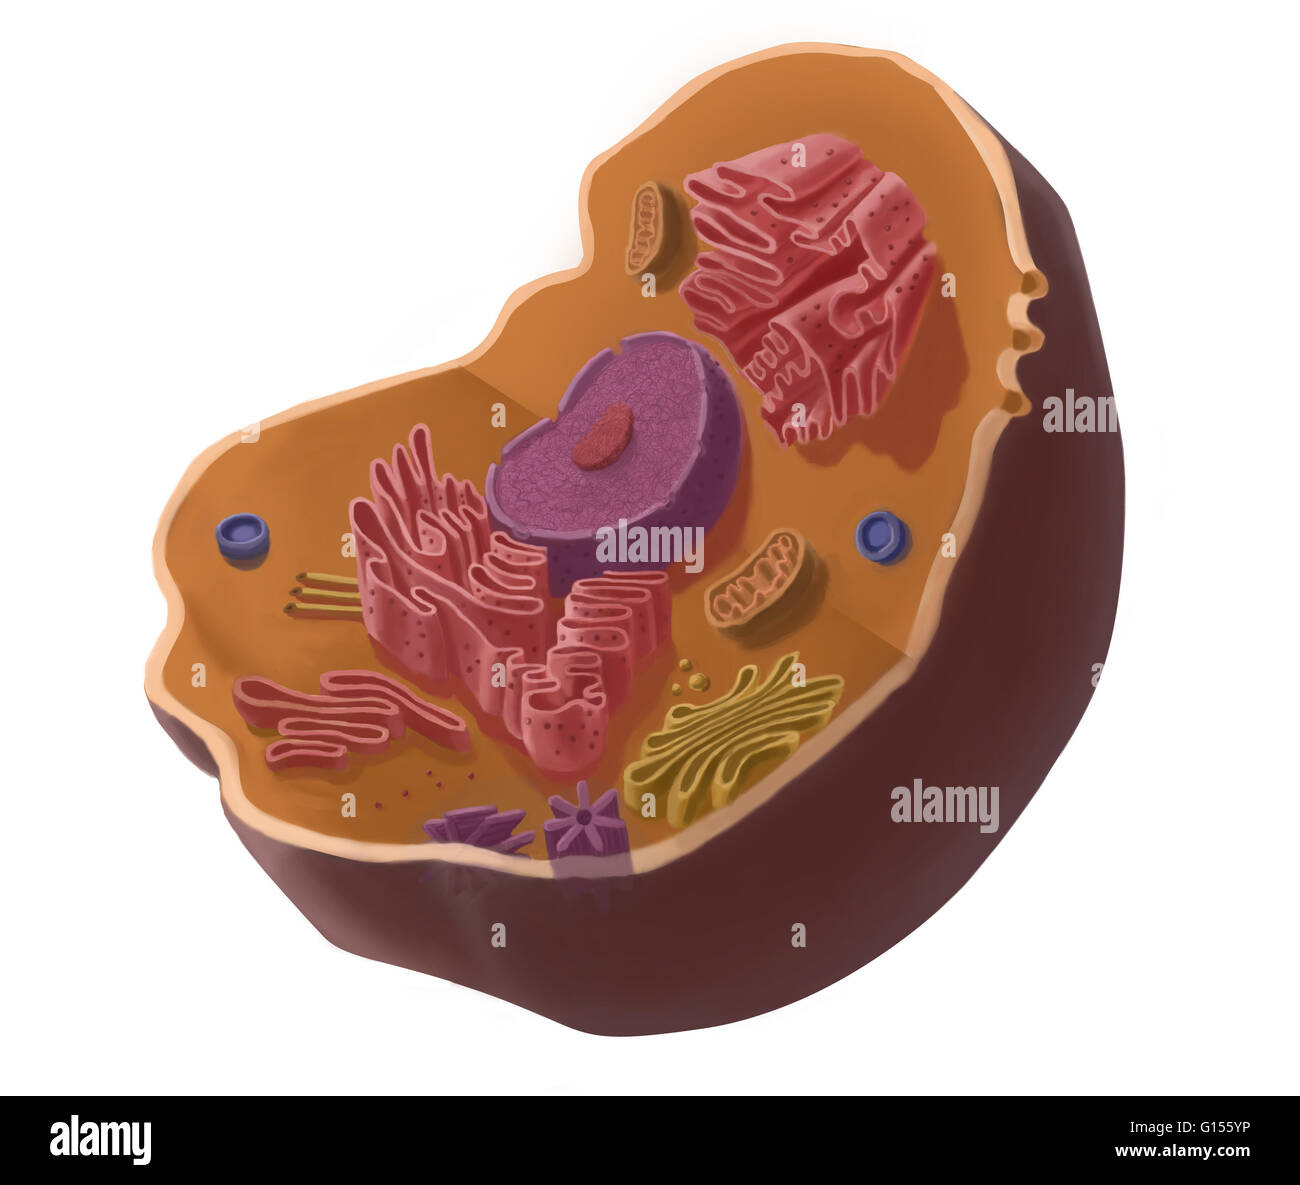 Illustration of animal cell. The cell has a nucleus in its center, that contains chromatin constituted of DNA, and nucleole, composed of RNA and proteins. Around the nucleus, we find the endoplasmic reticulum, then the Golgi's apparatus, mitochondria, cen Stock Photo